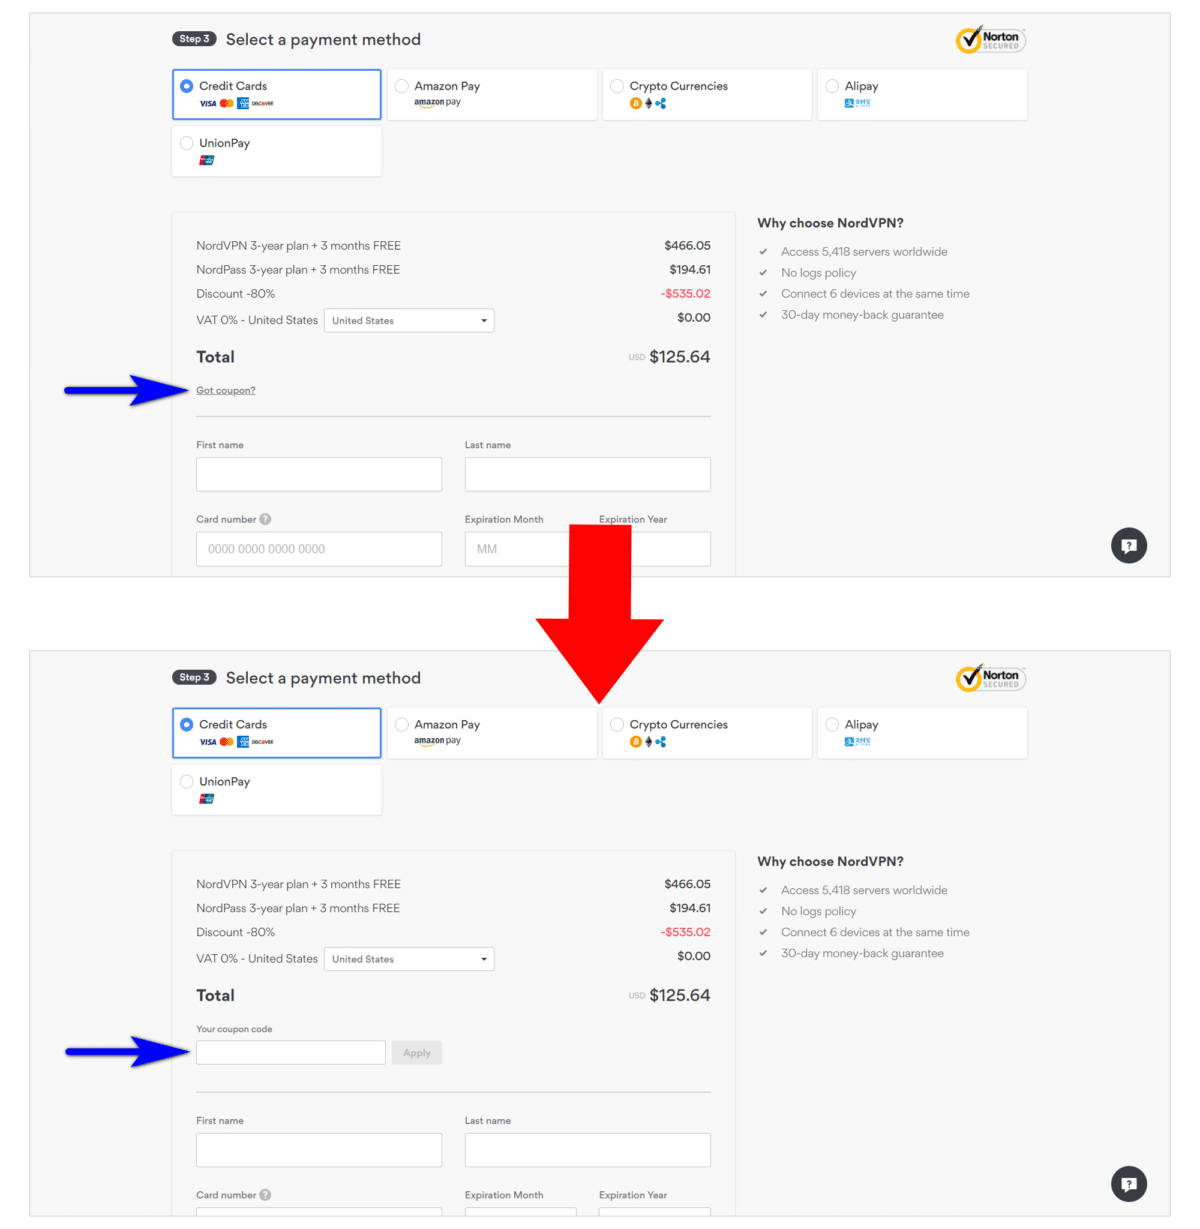 Comparison of NordVPN's checkout page showing a subtle design change in the coupon code section. The top part features a less obvious 'Got coupon?' link, while the bottom part highlights an expanded coupon code entry field, guiding users smoothly through the payment process without distracting from the main transaction..